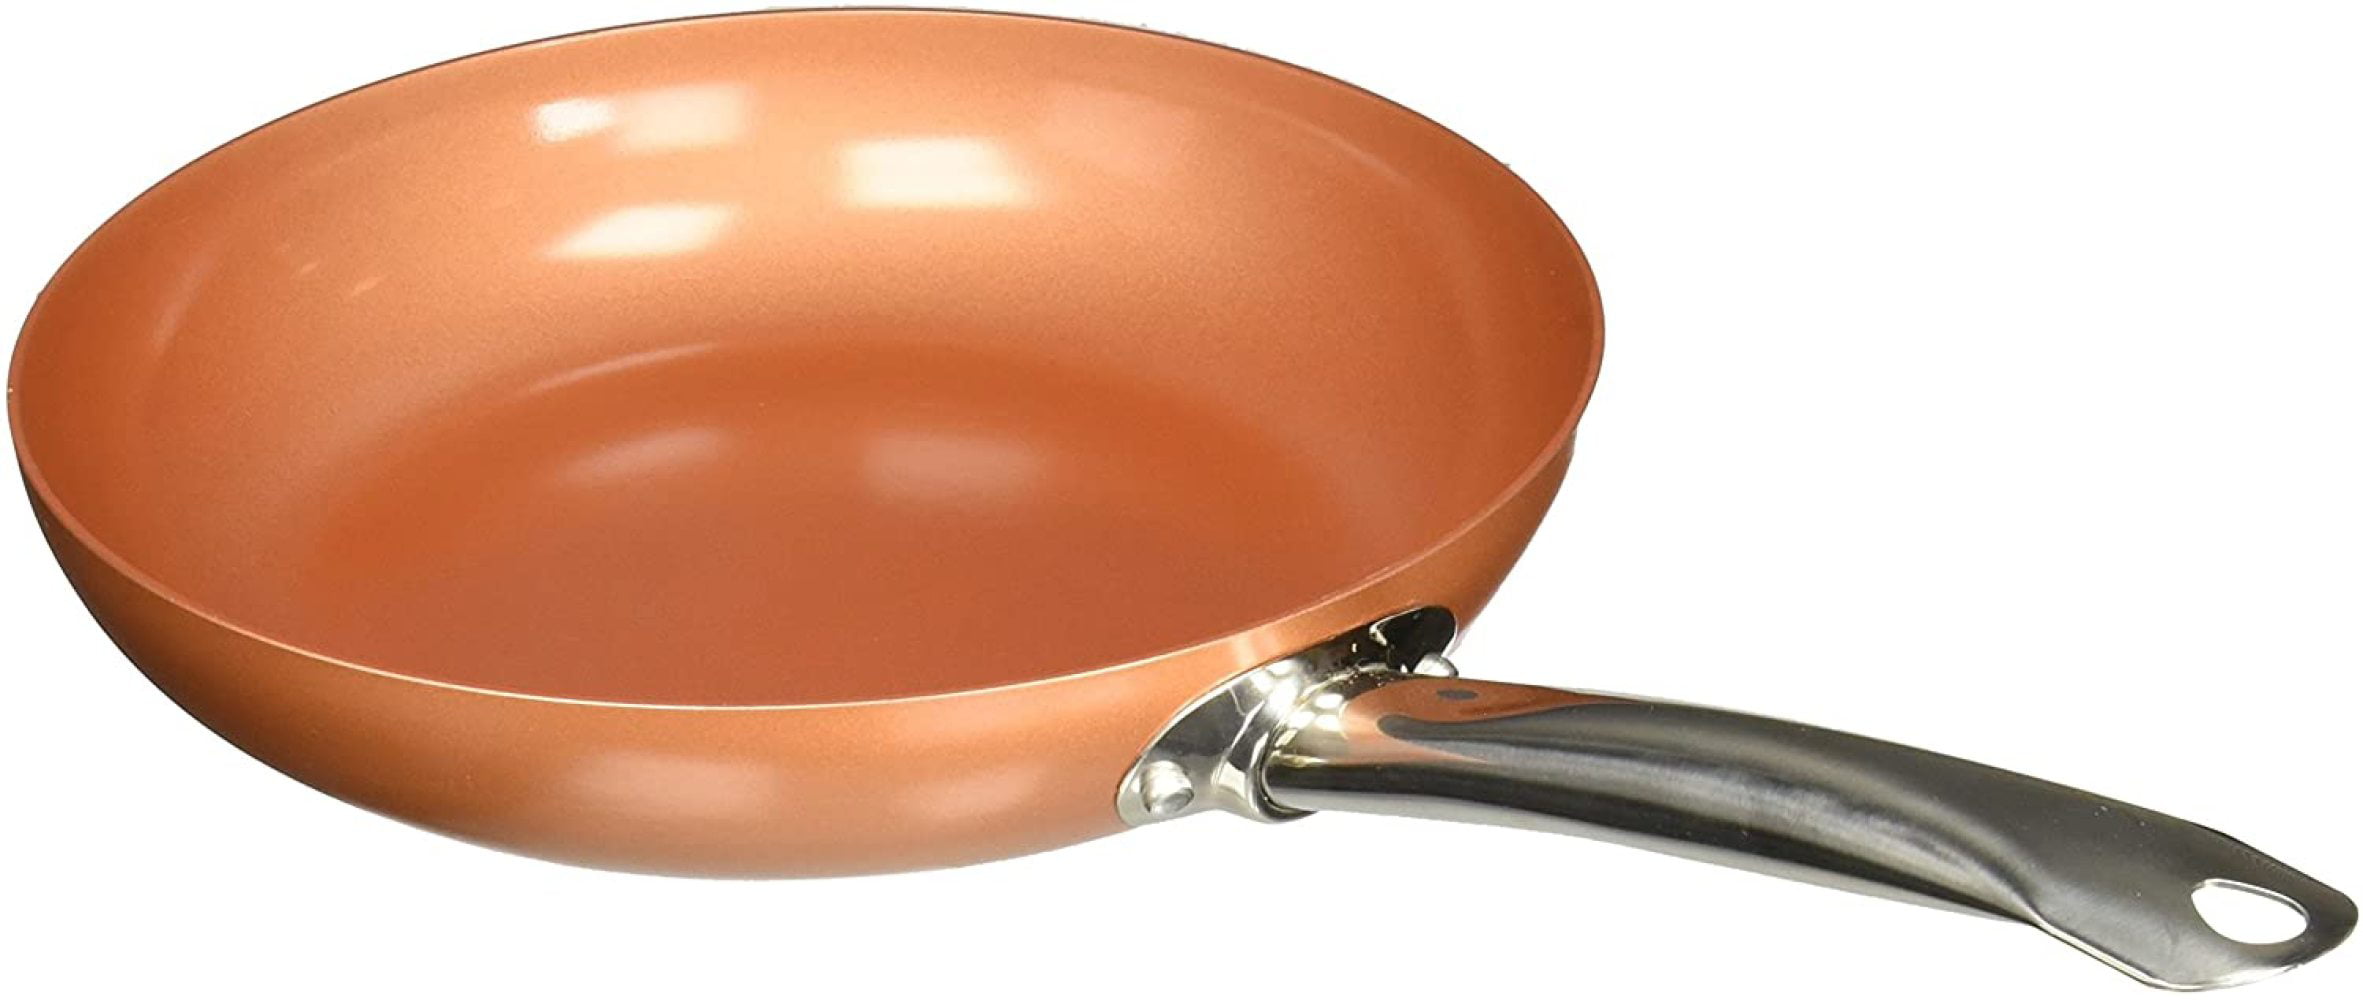  Skillet with Ceramic Non Stick Copper Chef 10 Inch Round Frying Pan With Lid 